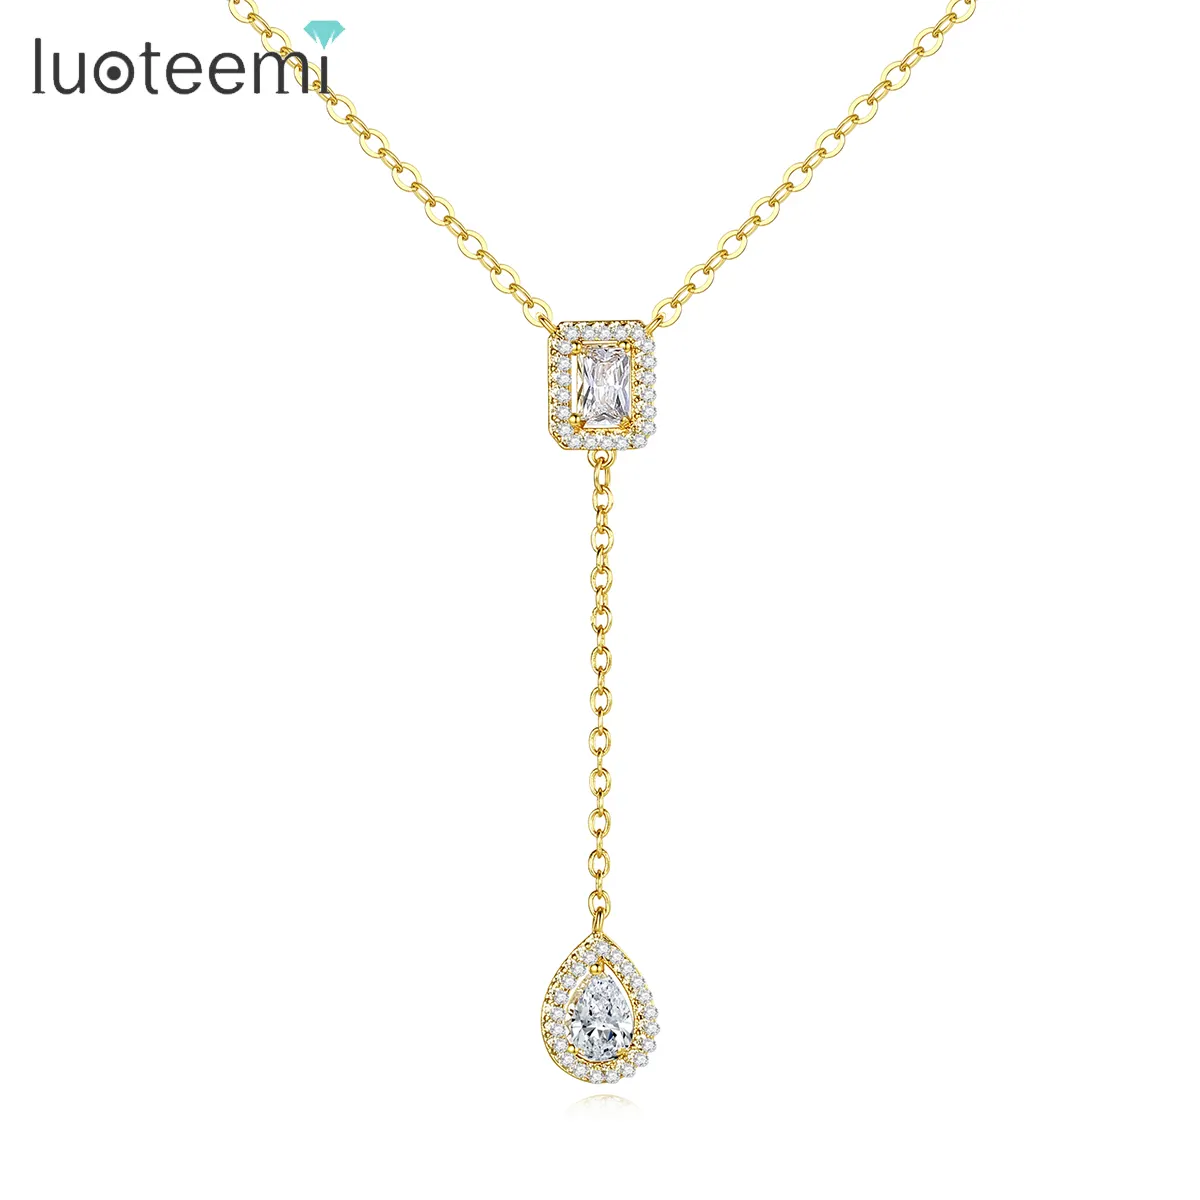 LUOTEEMI Hot Sale CZ Diamond Pendant Necklace 18K Gold Plated Necklace Jewelry for Gifts Party